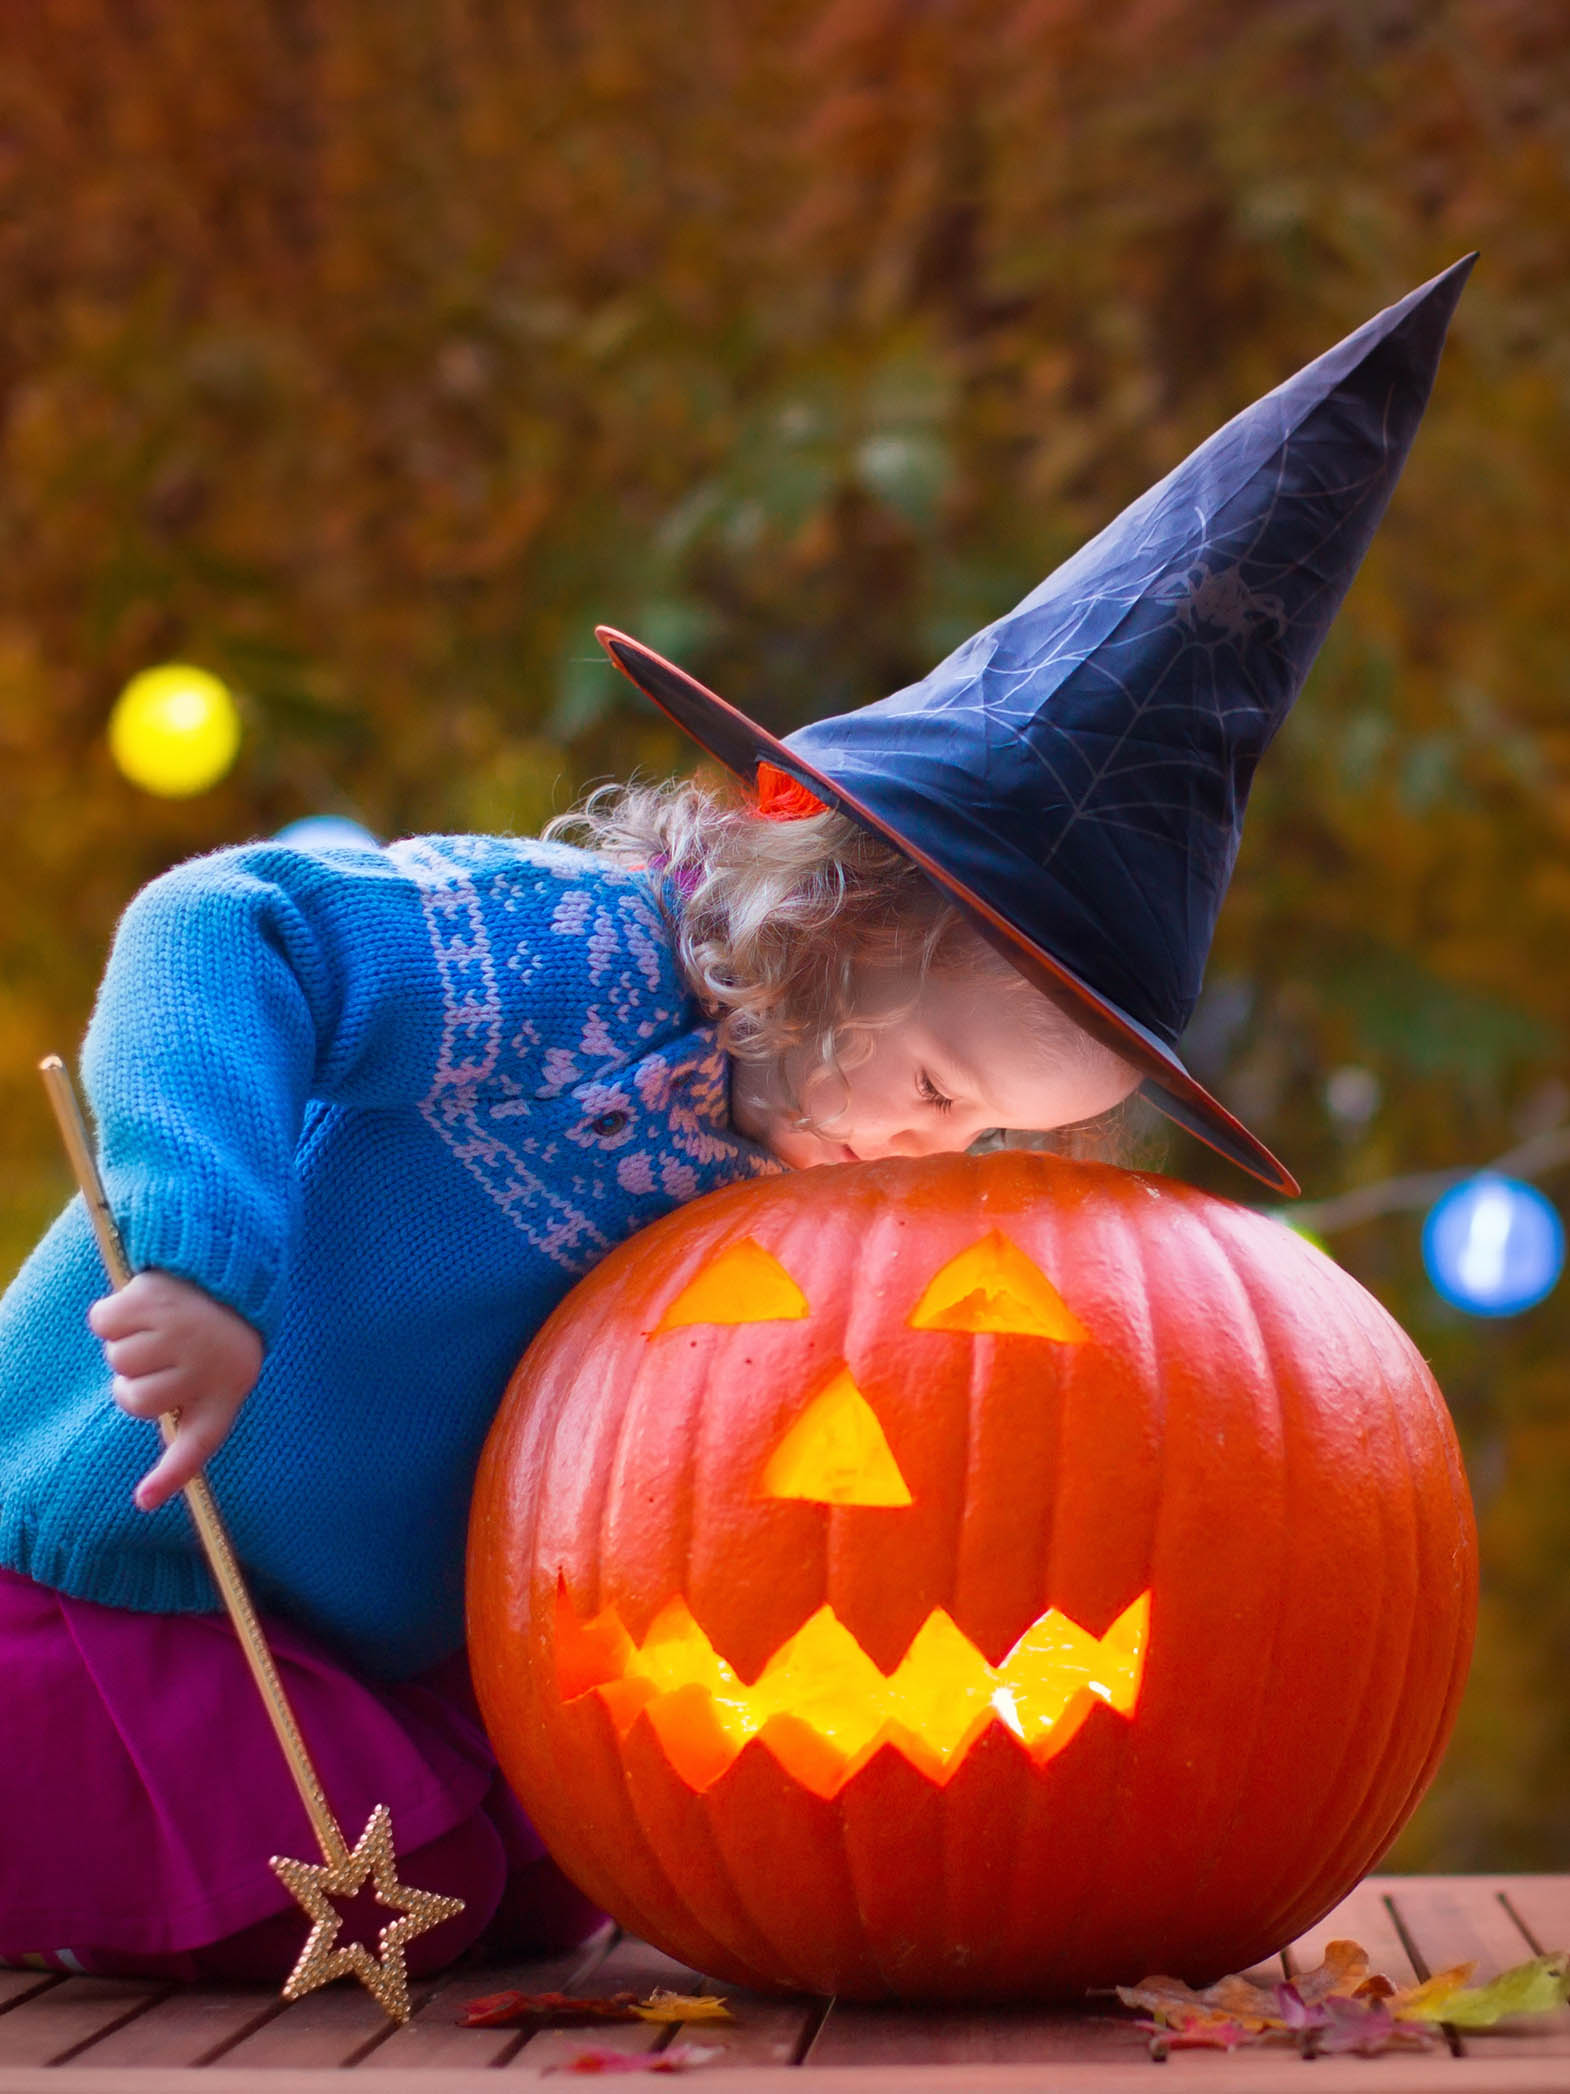 Toddler dressed as witch with jack-o-lantern.